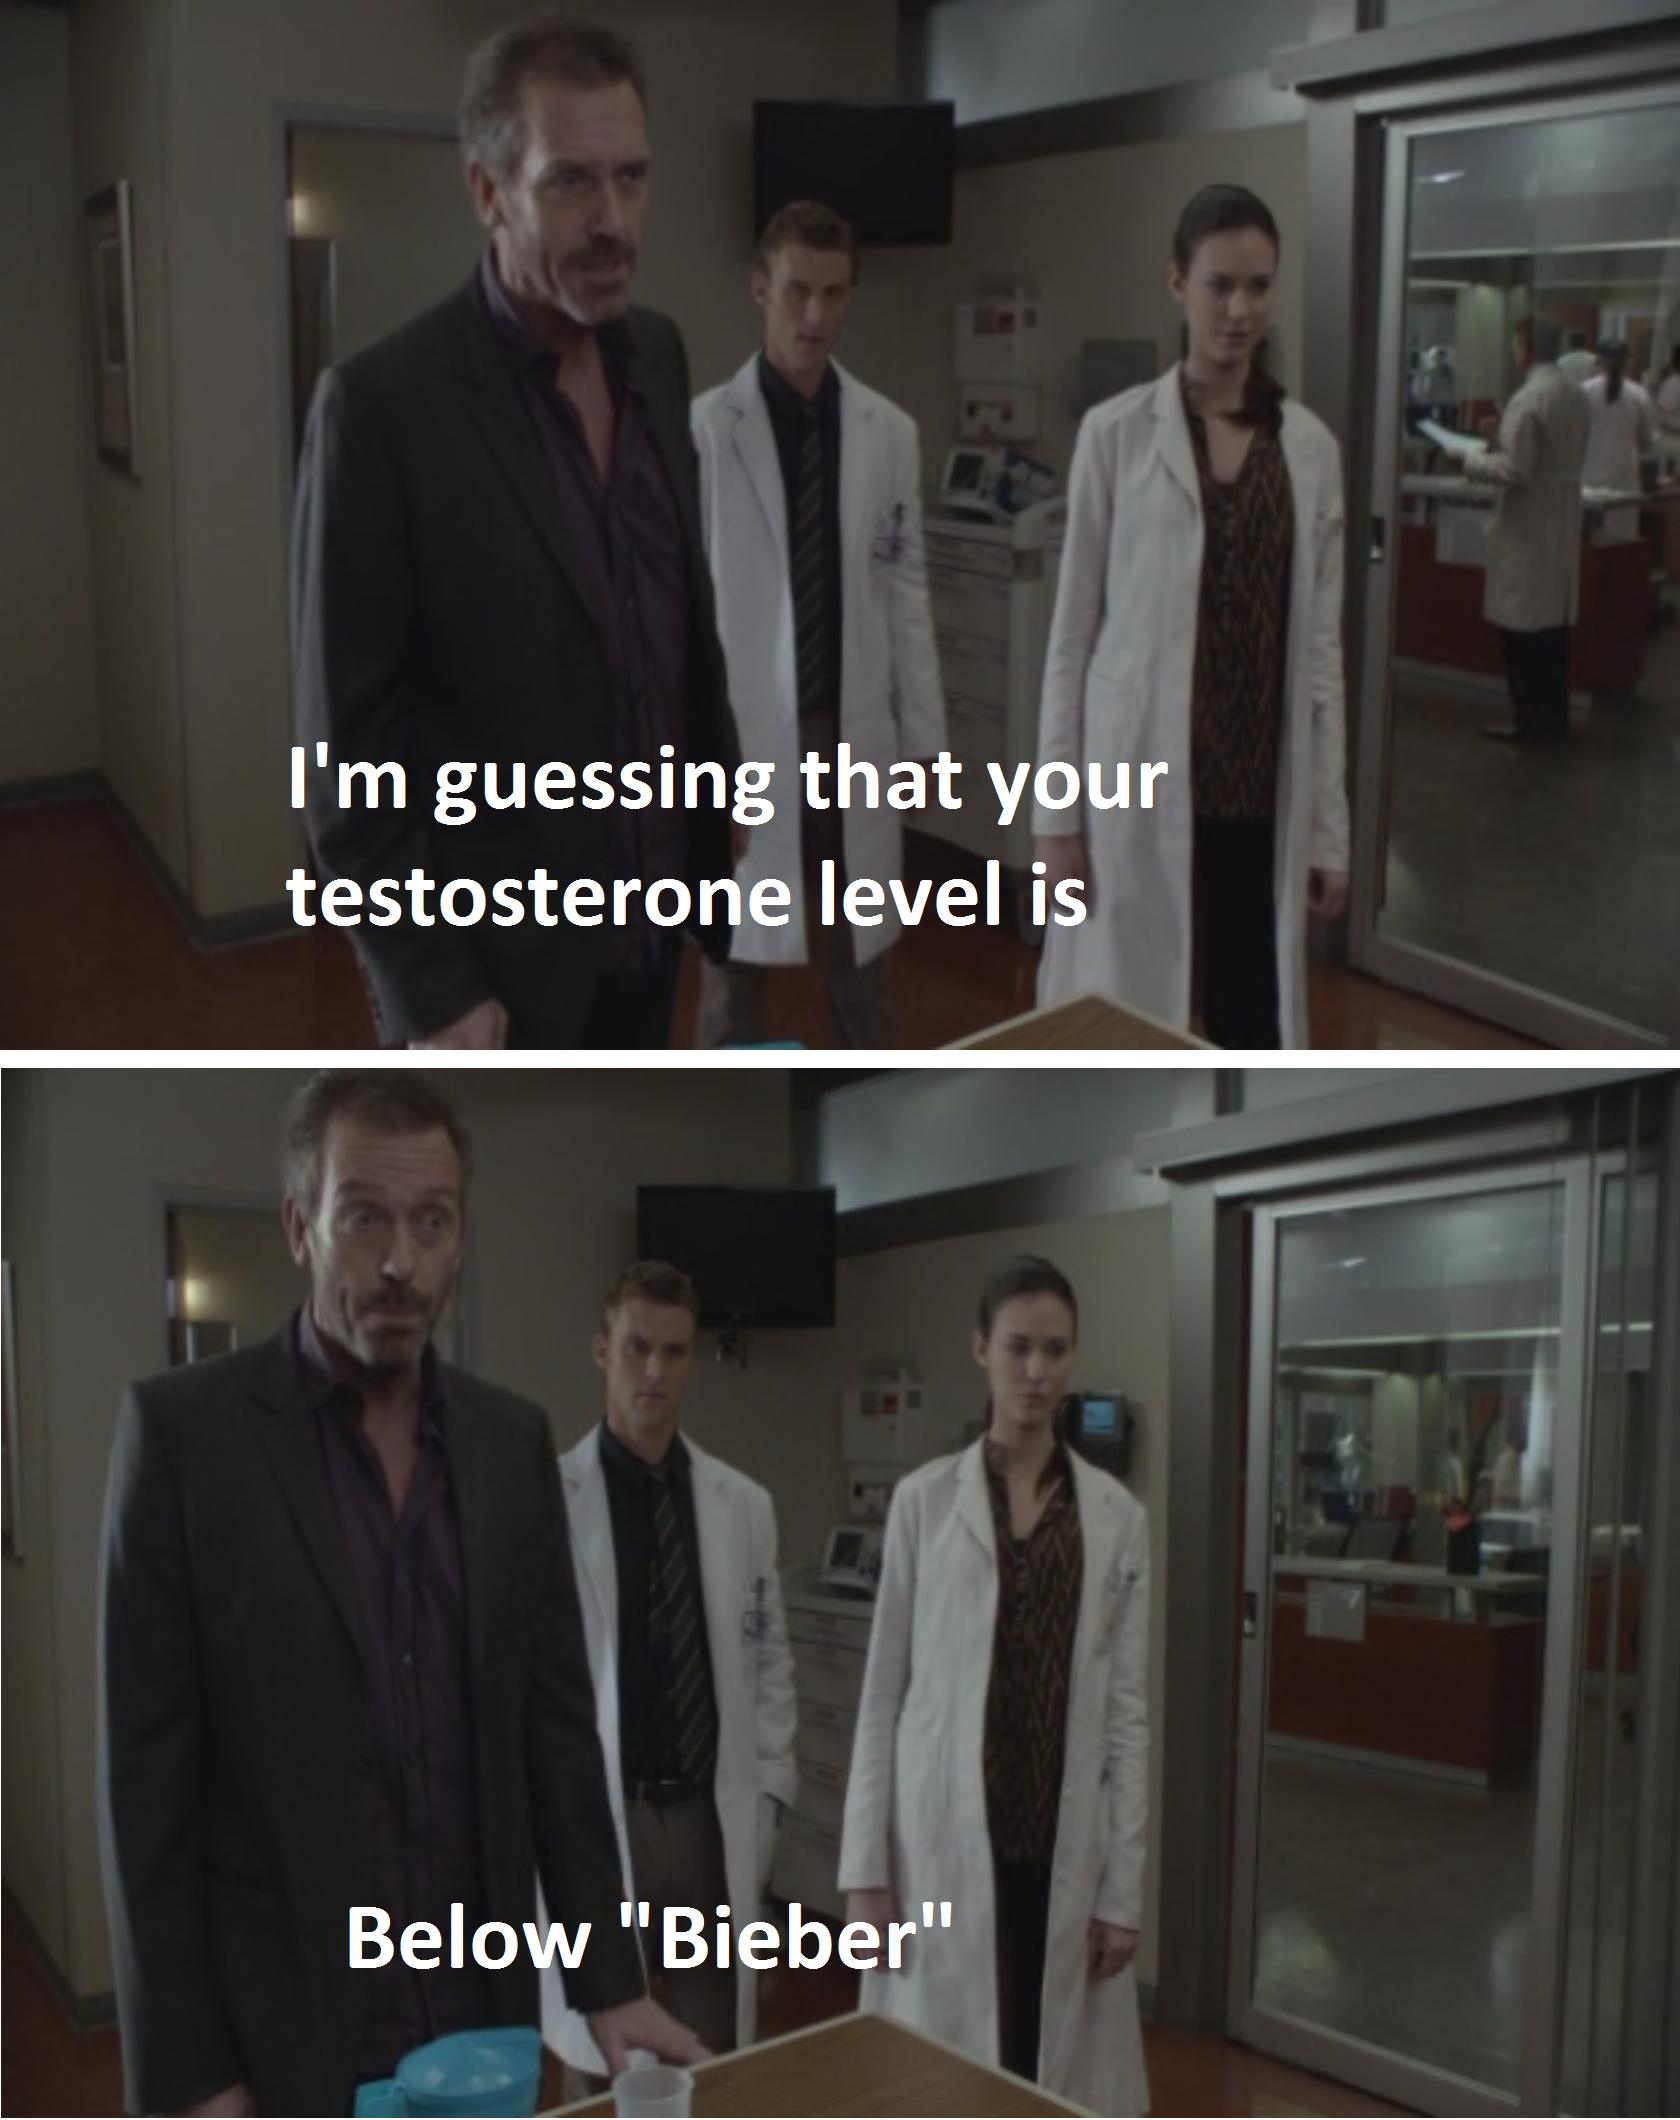 Just House being House